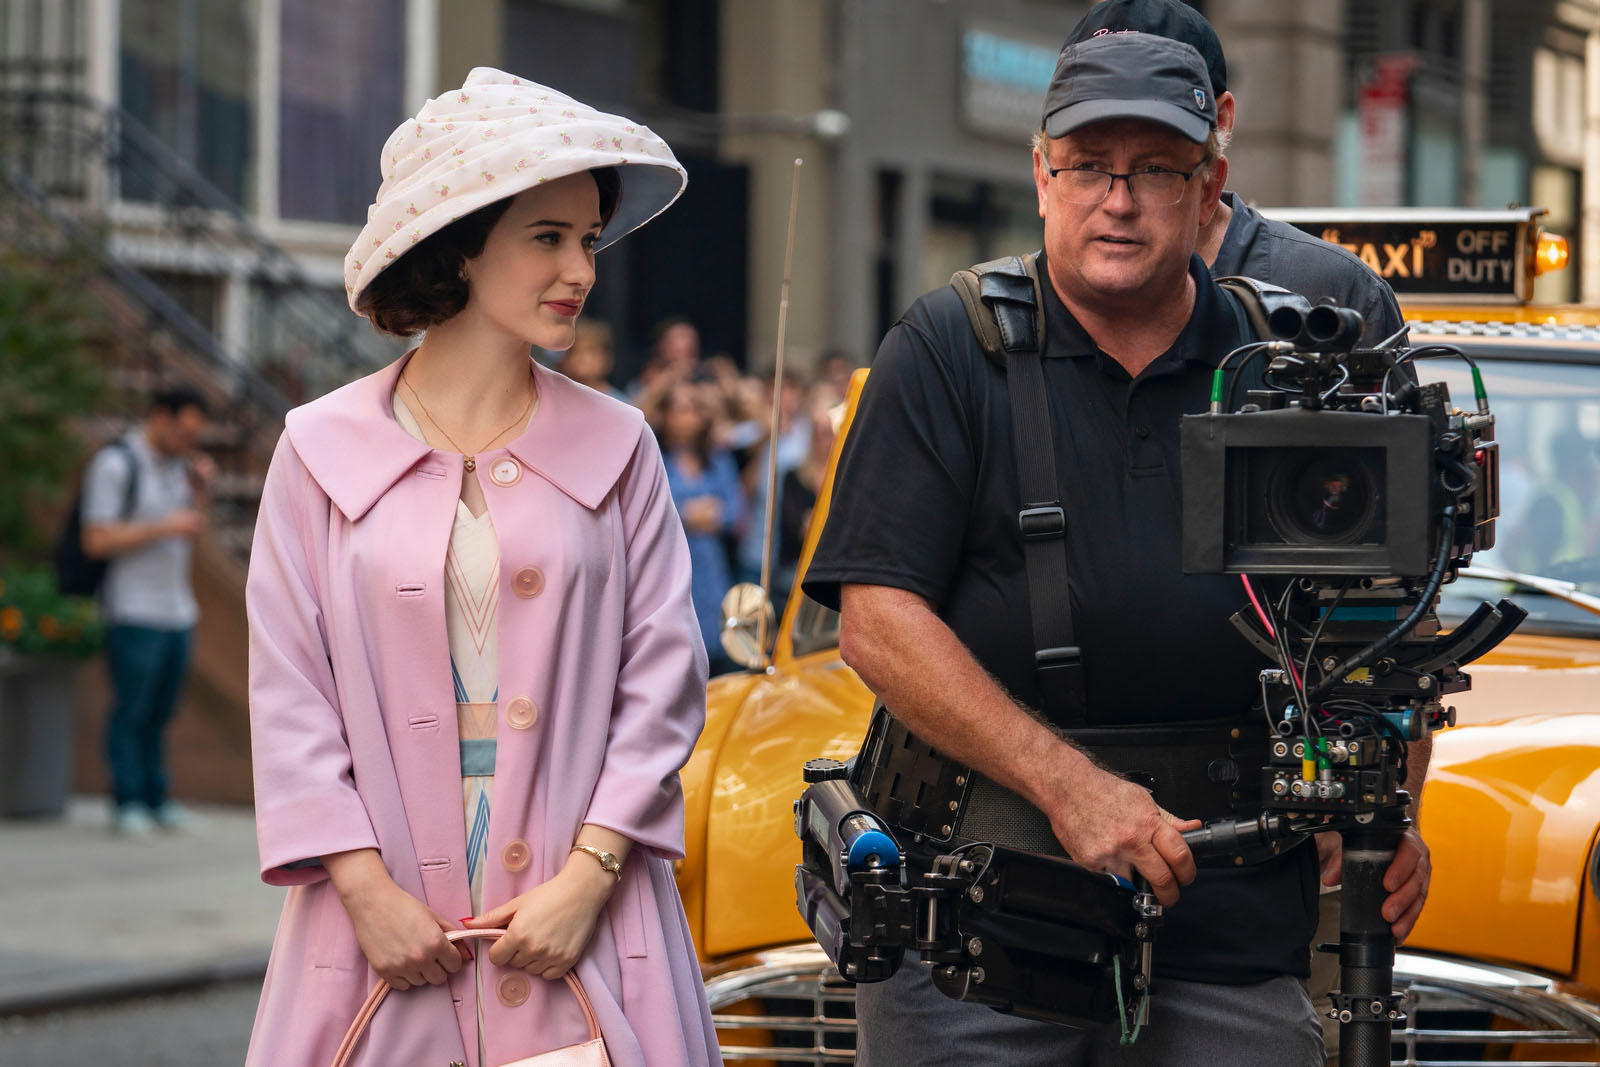 Rachel Brosnahan stays close to McConkey's steadicam rig on location for The Marvelous Mrs. Maisel. Image © Amazon Studios